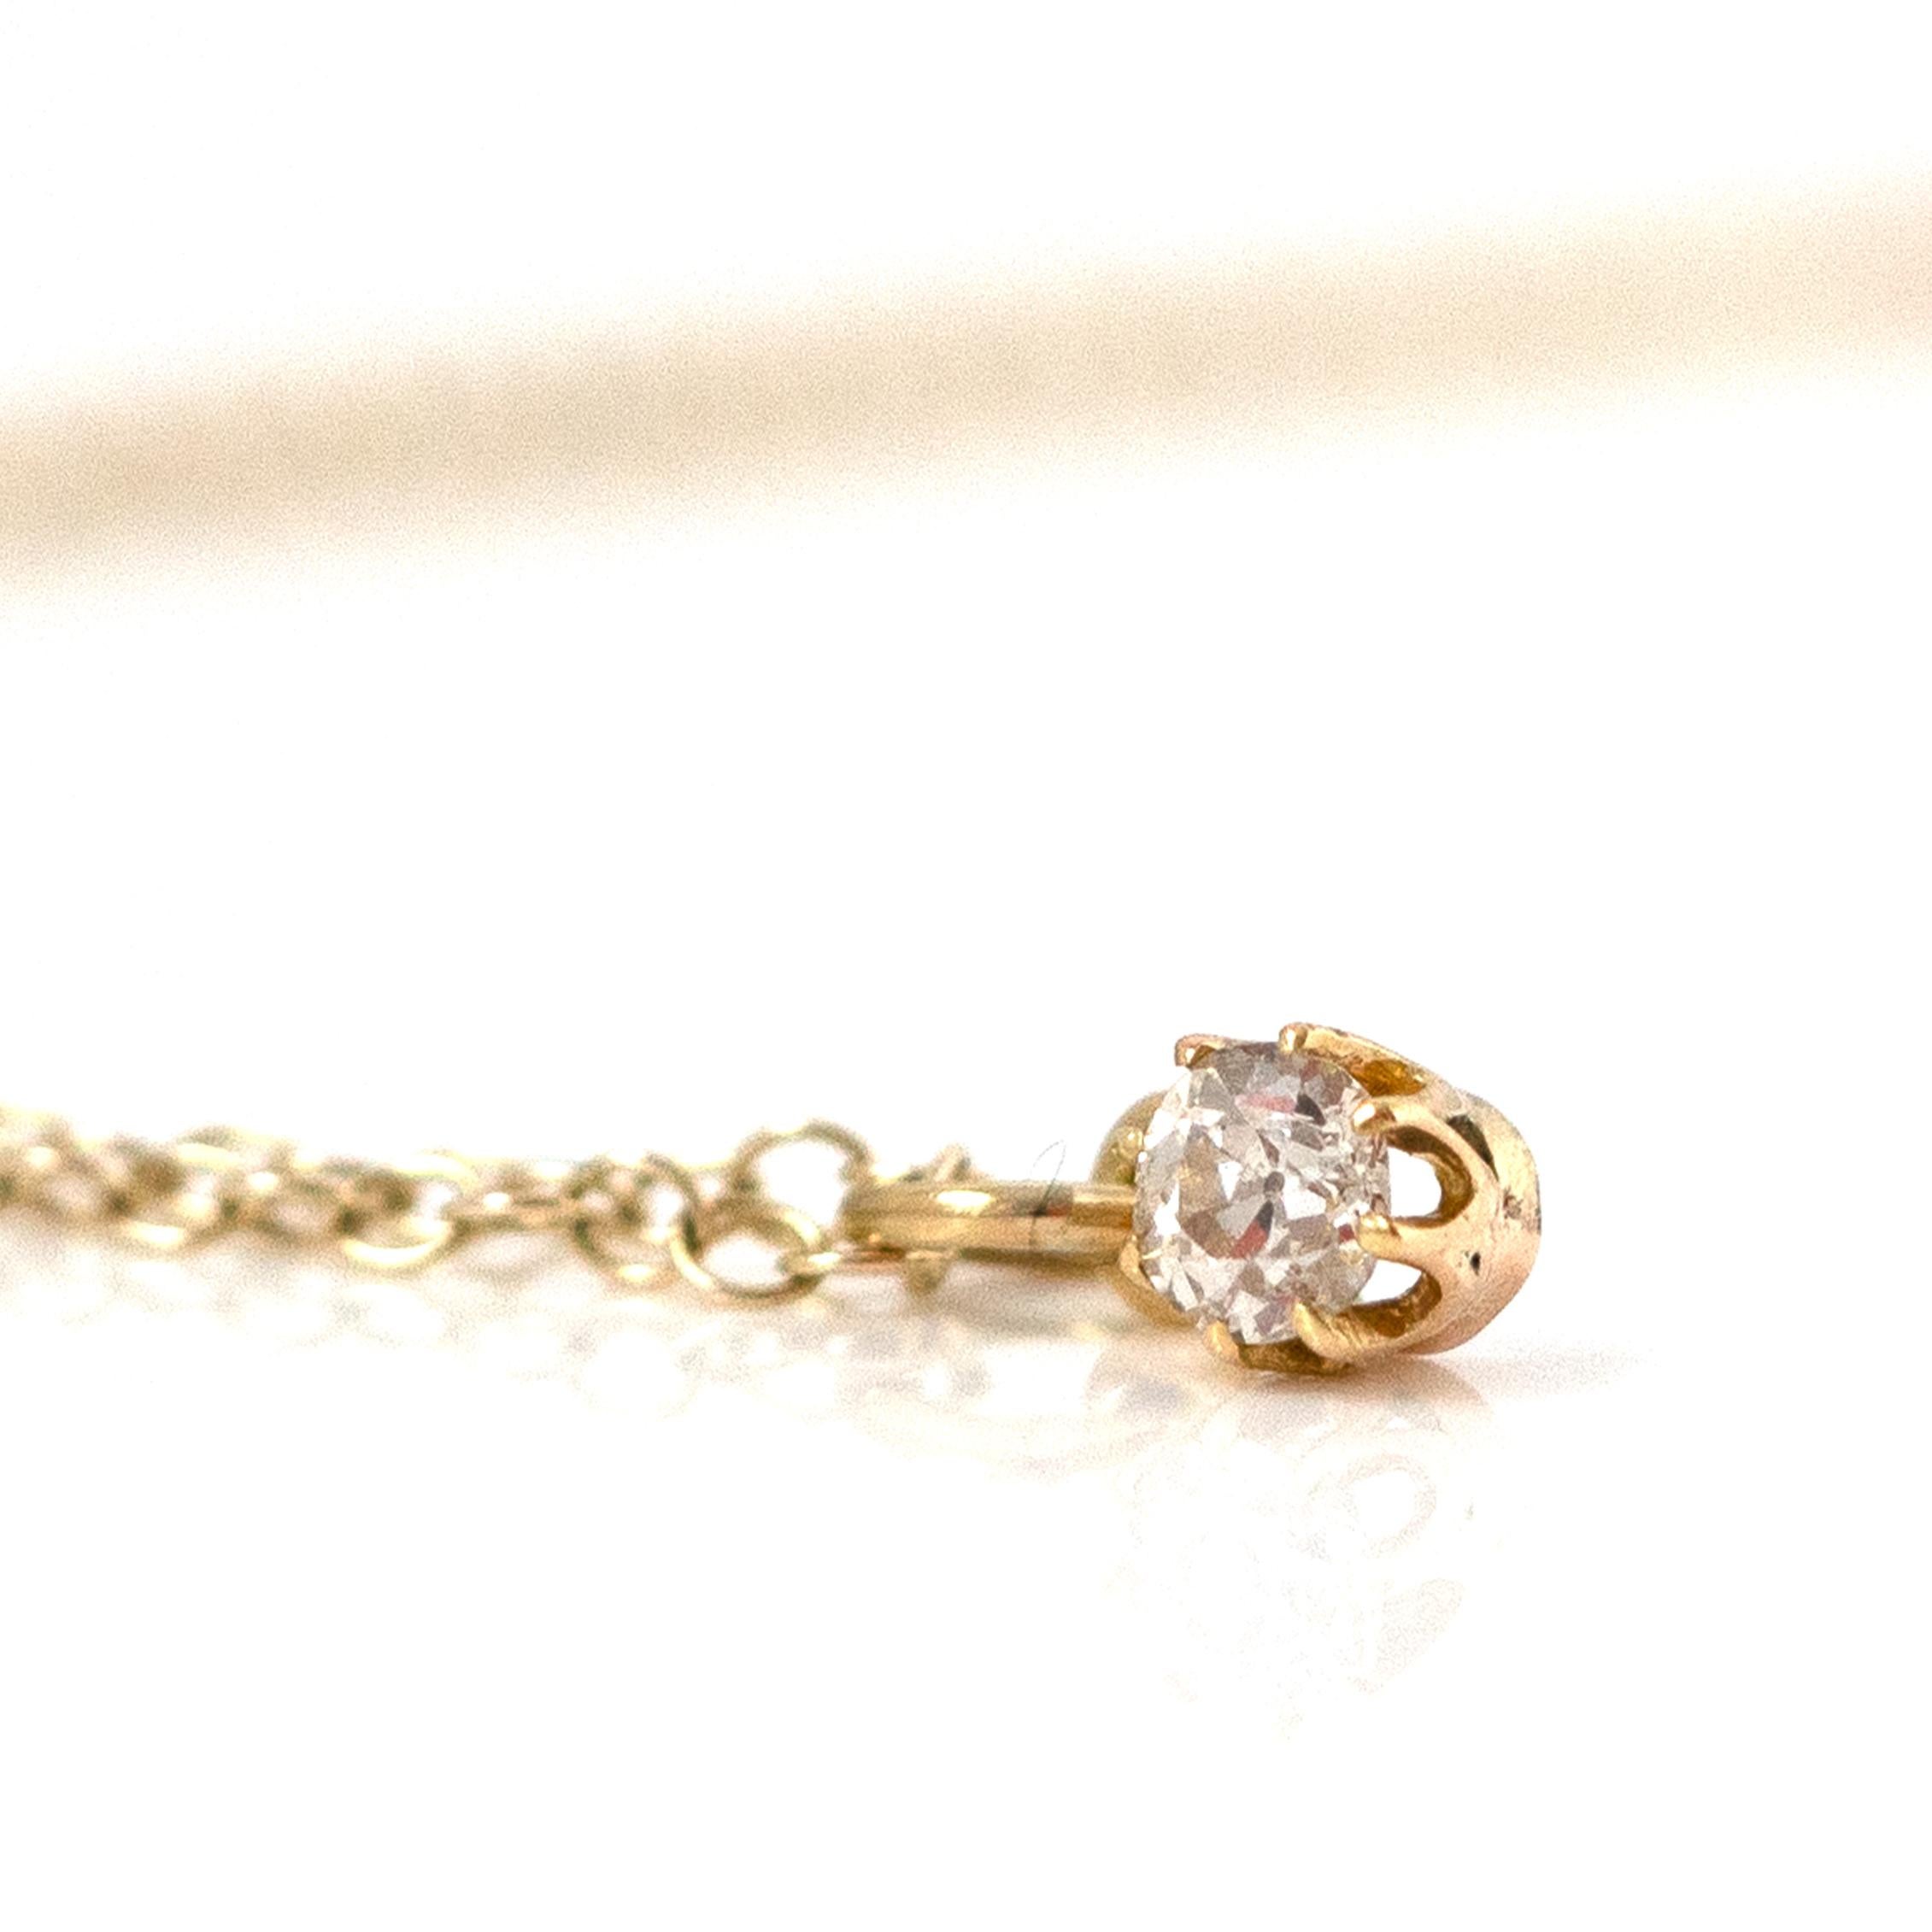 Our Antique Edwardian pendant, crafted to blend history with modern craftsmanship. The pendant displays a Xct Old European Cut diamond, originally part of an Edwardian brooch, now reimagined. The diamond is meticulously set in a classic 15ct yellow